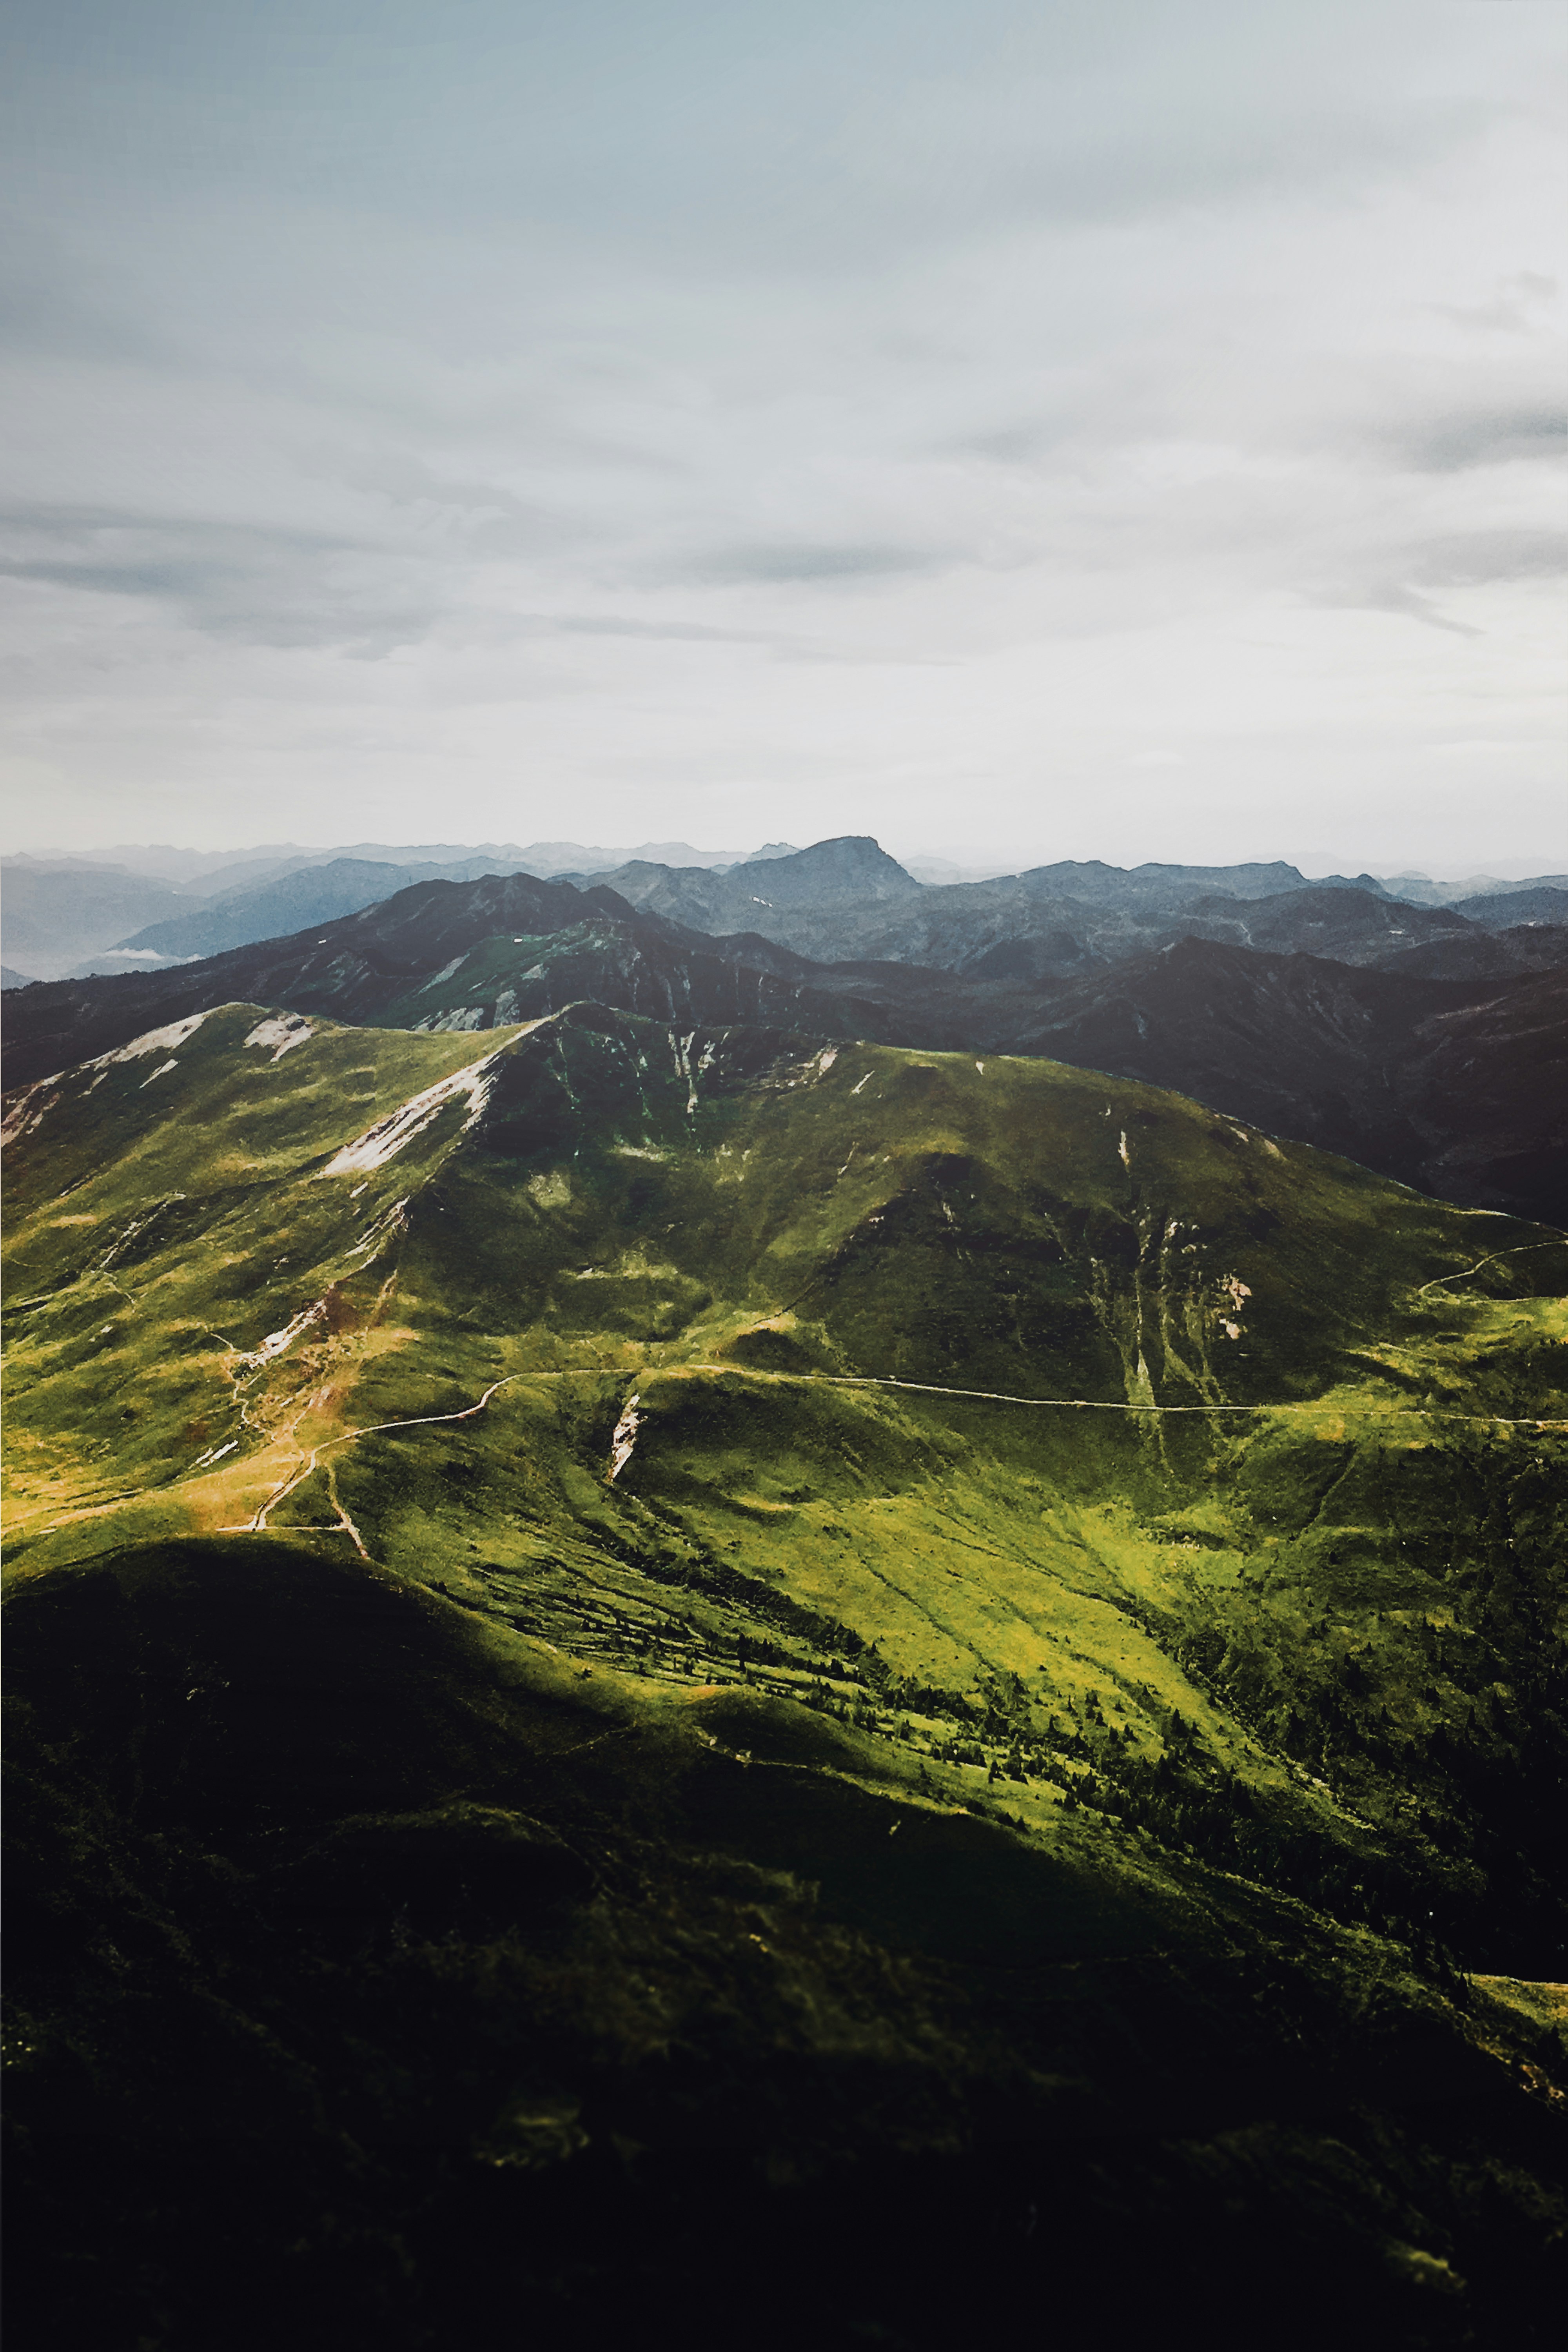 helicopter view above the alps -
#shotoniphone